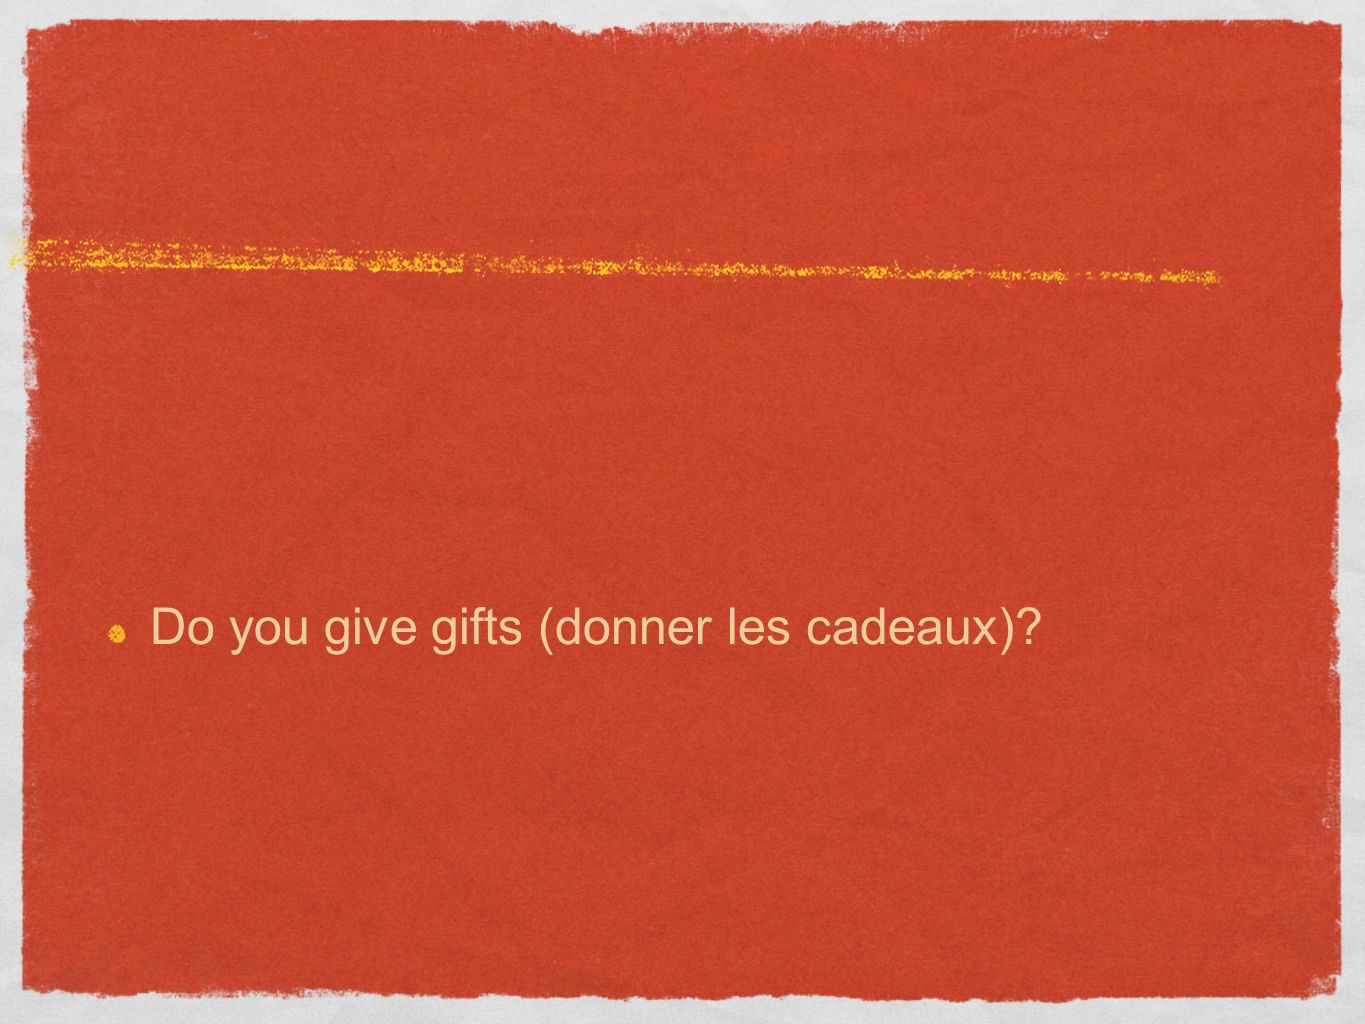 Do you give gifts (donner les cadeaux)